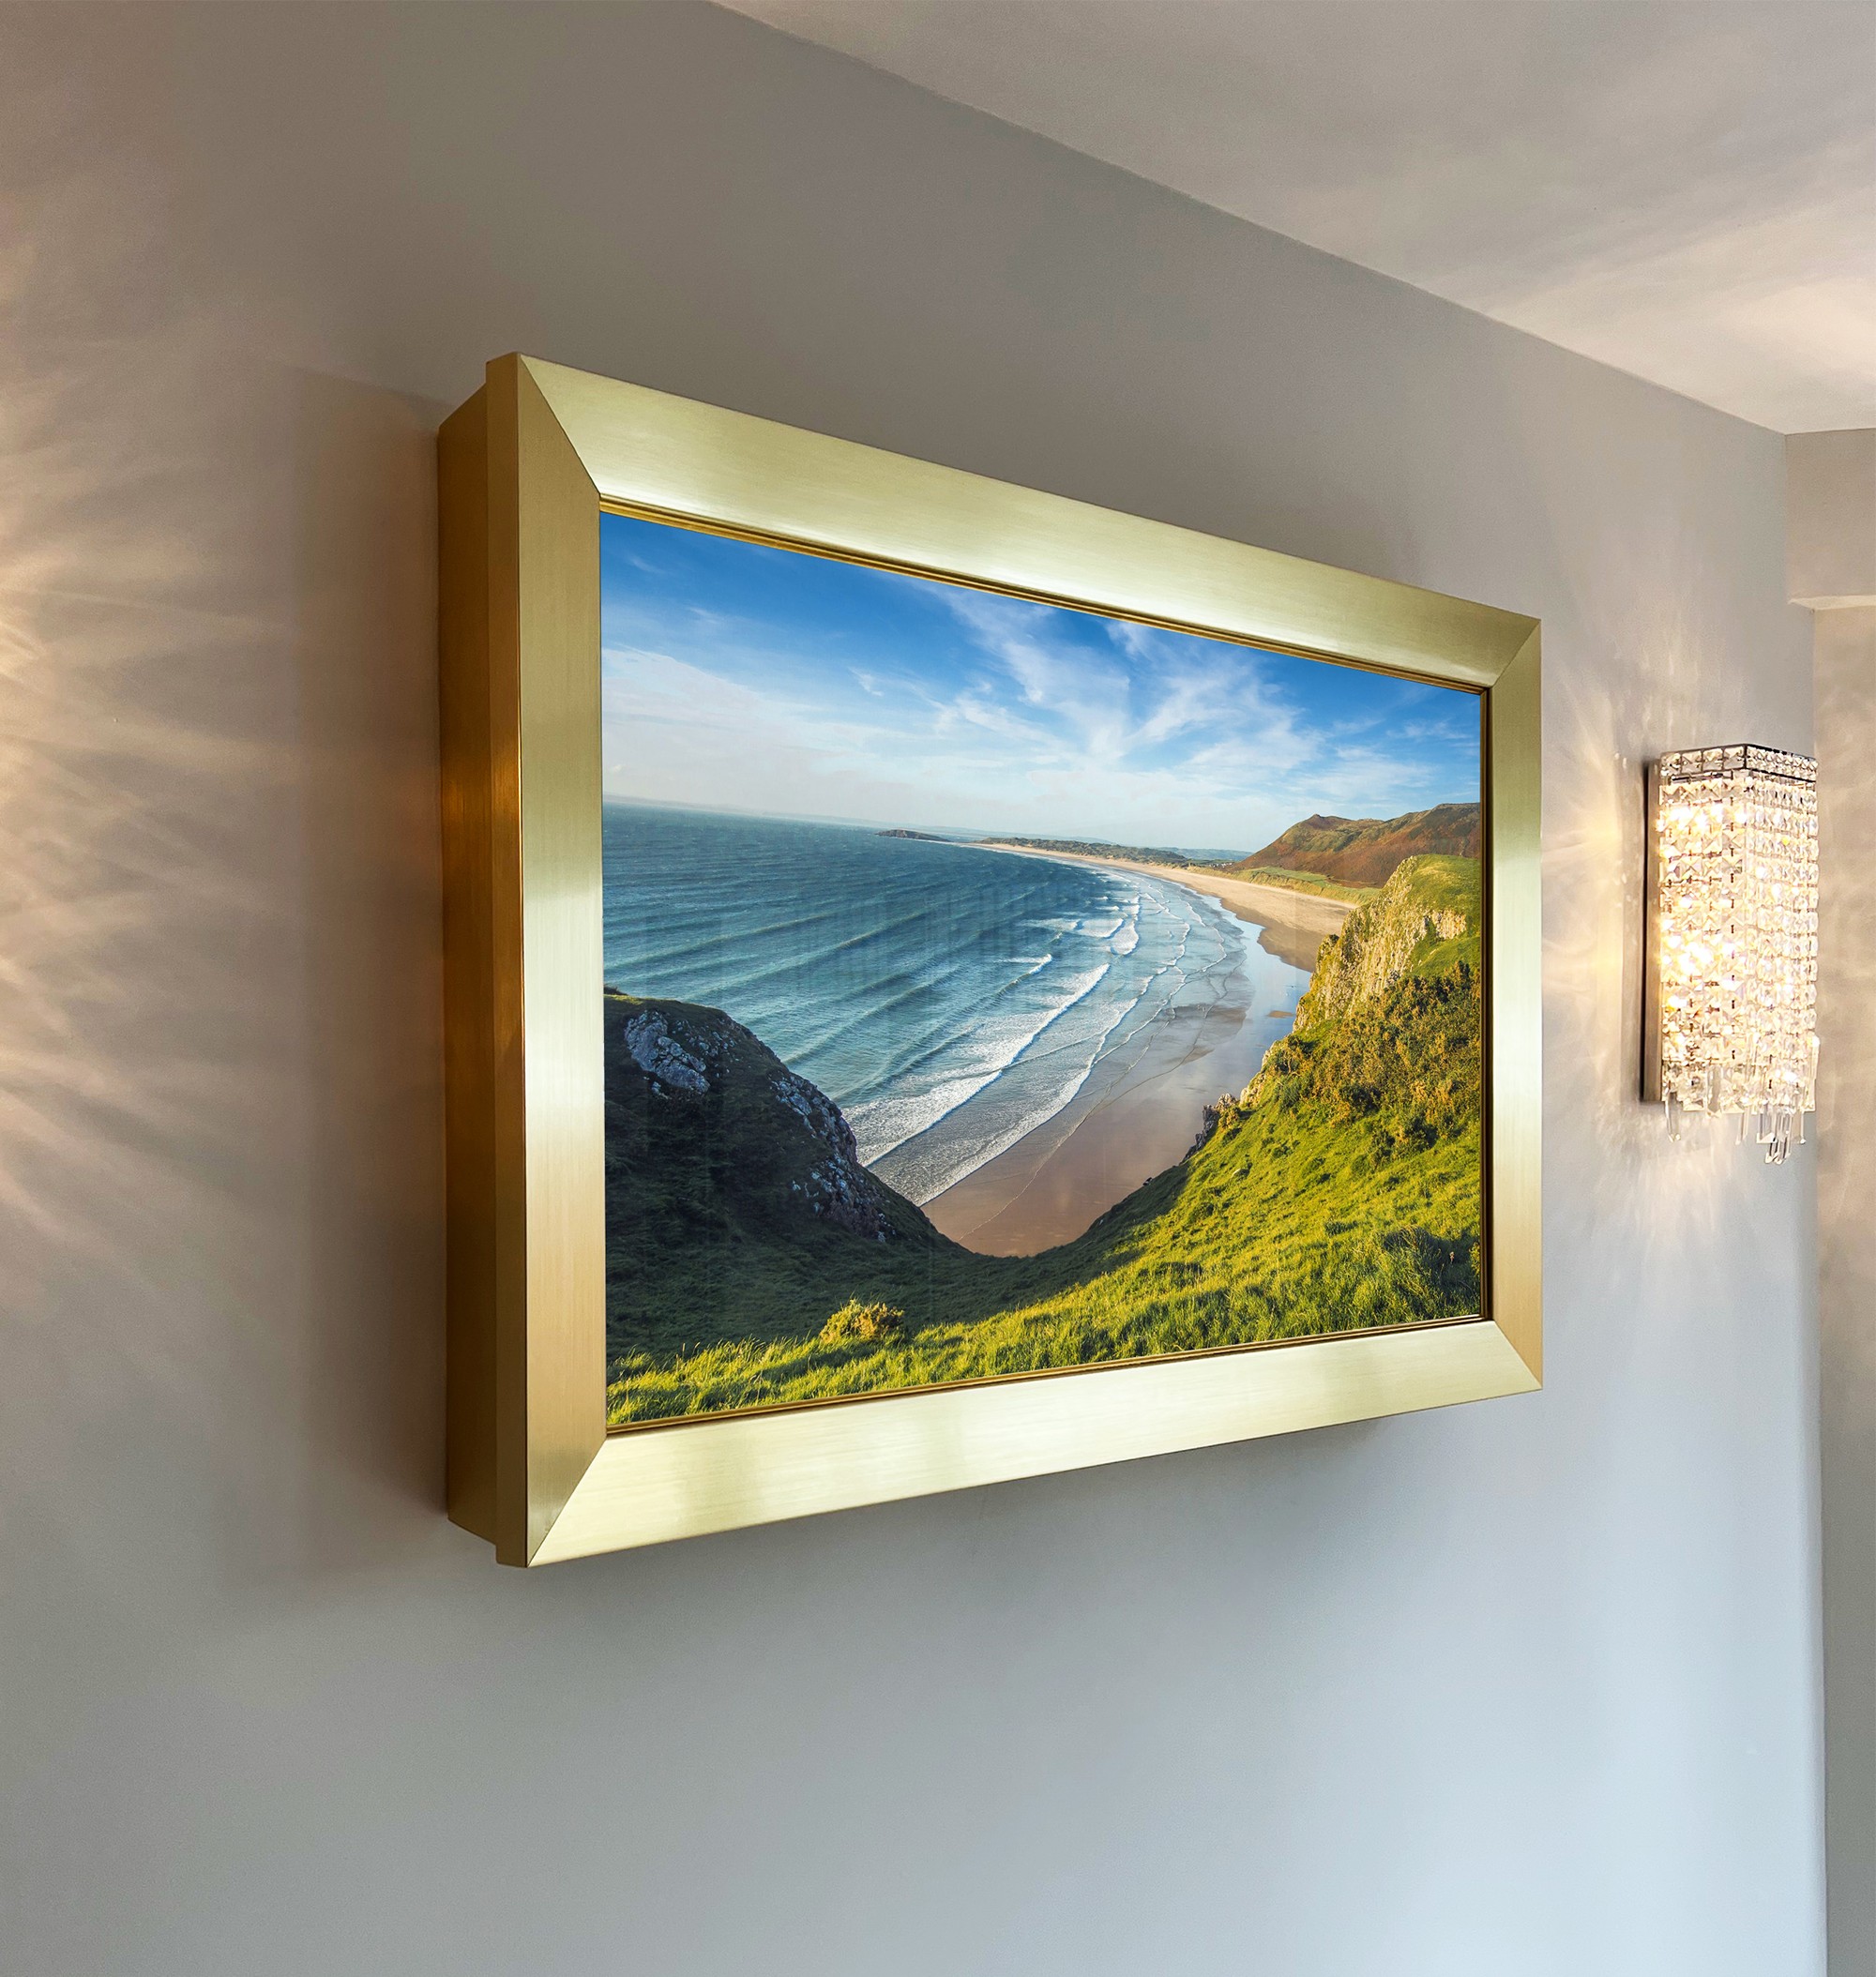 50" signature series mirror tv with gold frame